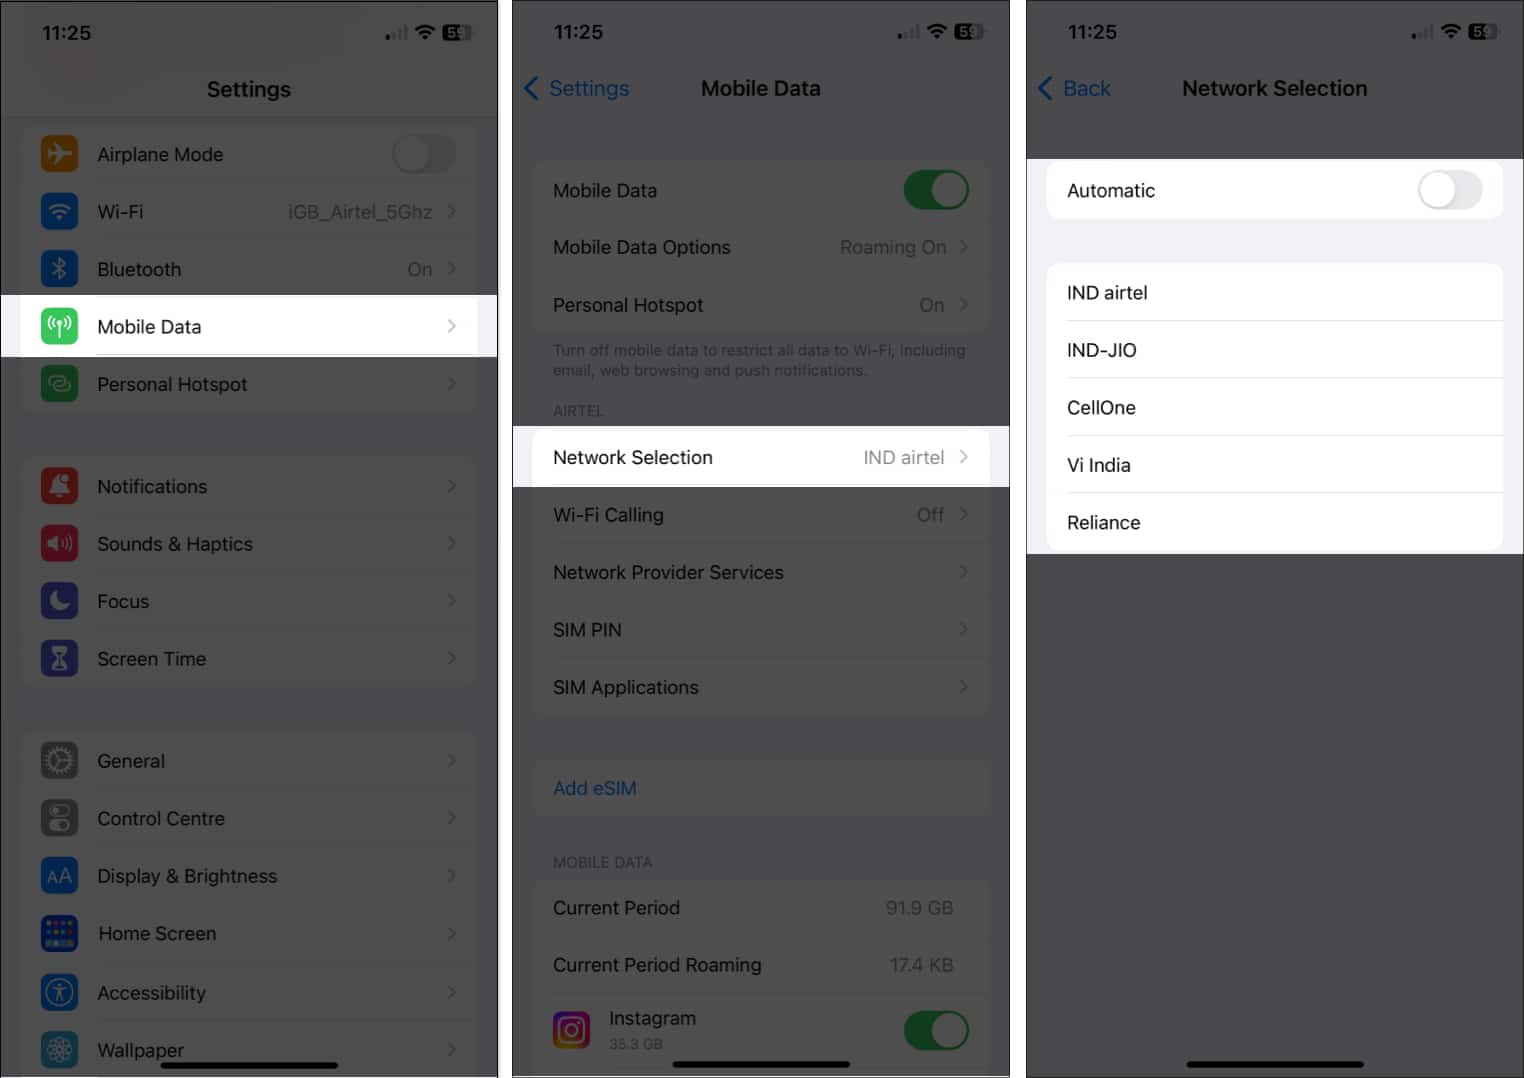 Go to Settings, choose Cellular Data, tap Network Selection, and toggle off Automatic